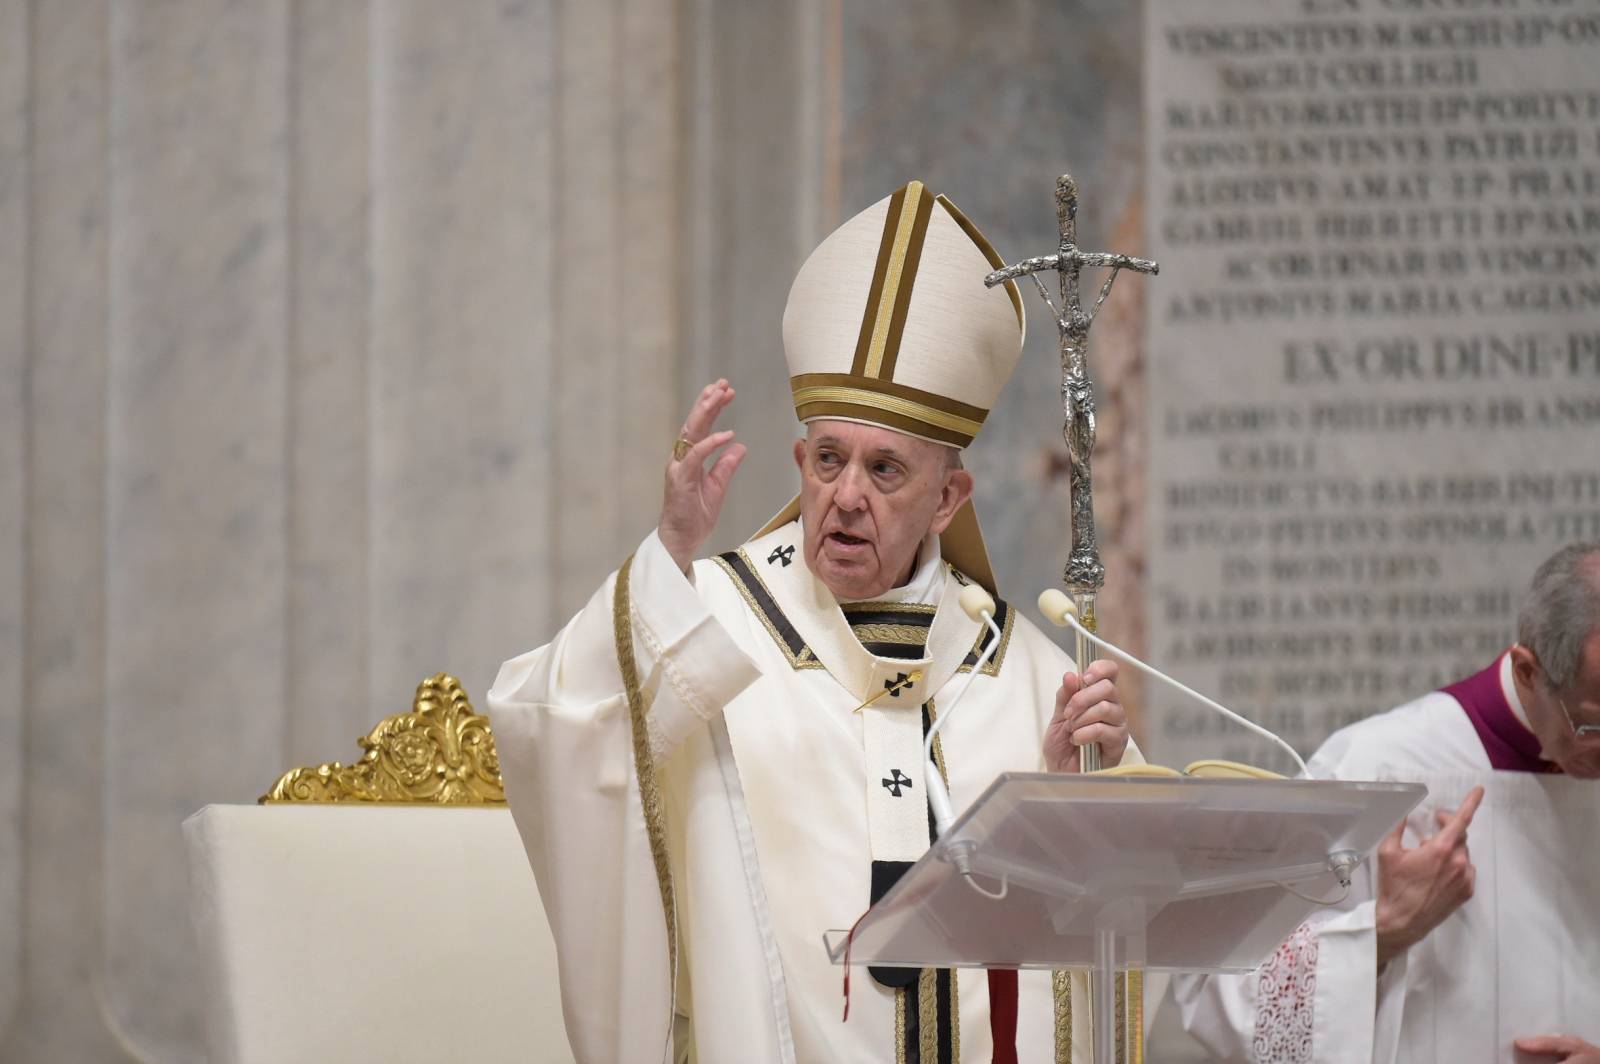 Pope Francis leads an Easter vigil service with no public participation due to the coronavirus (COVID-19) outbreak, in Vatican